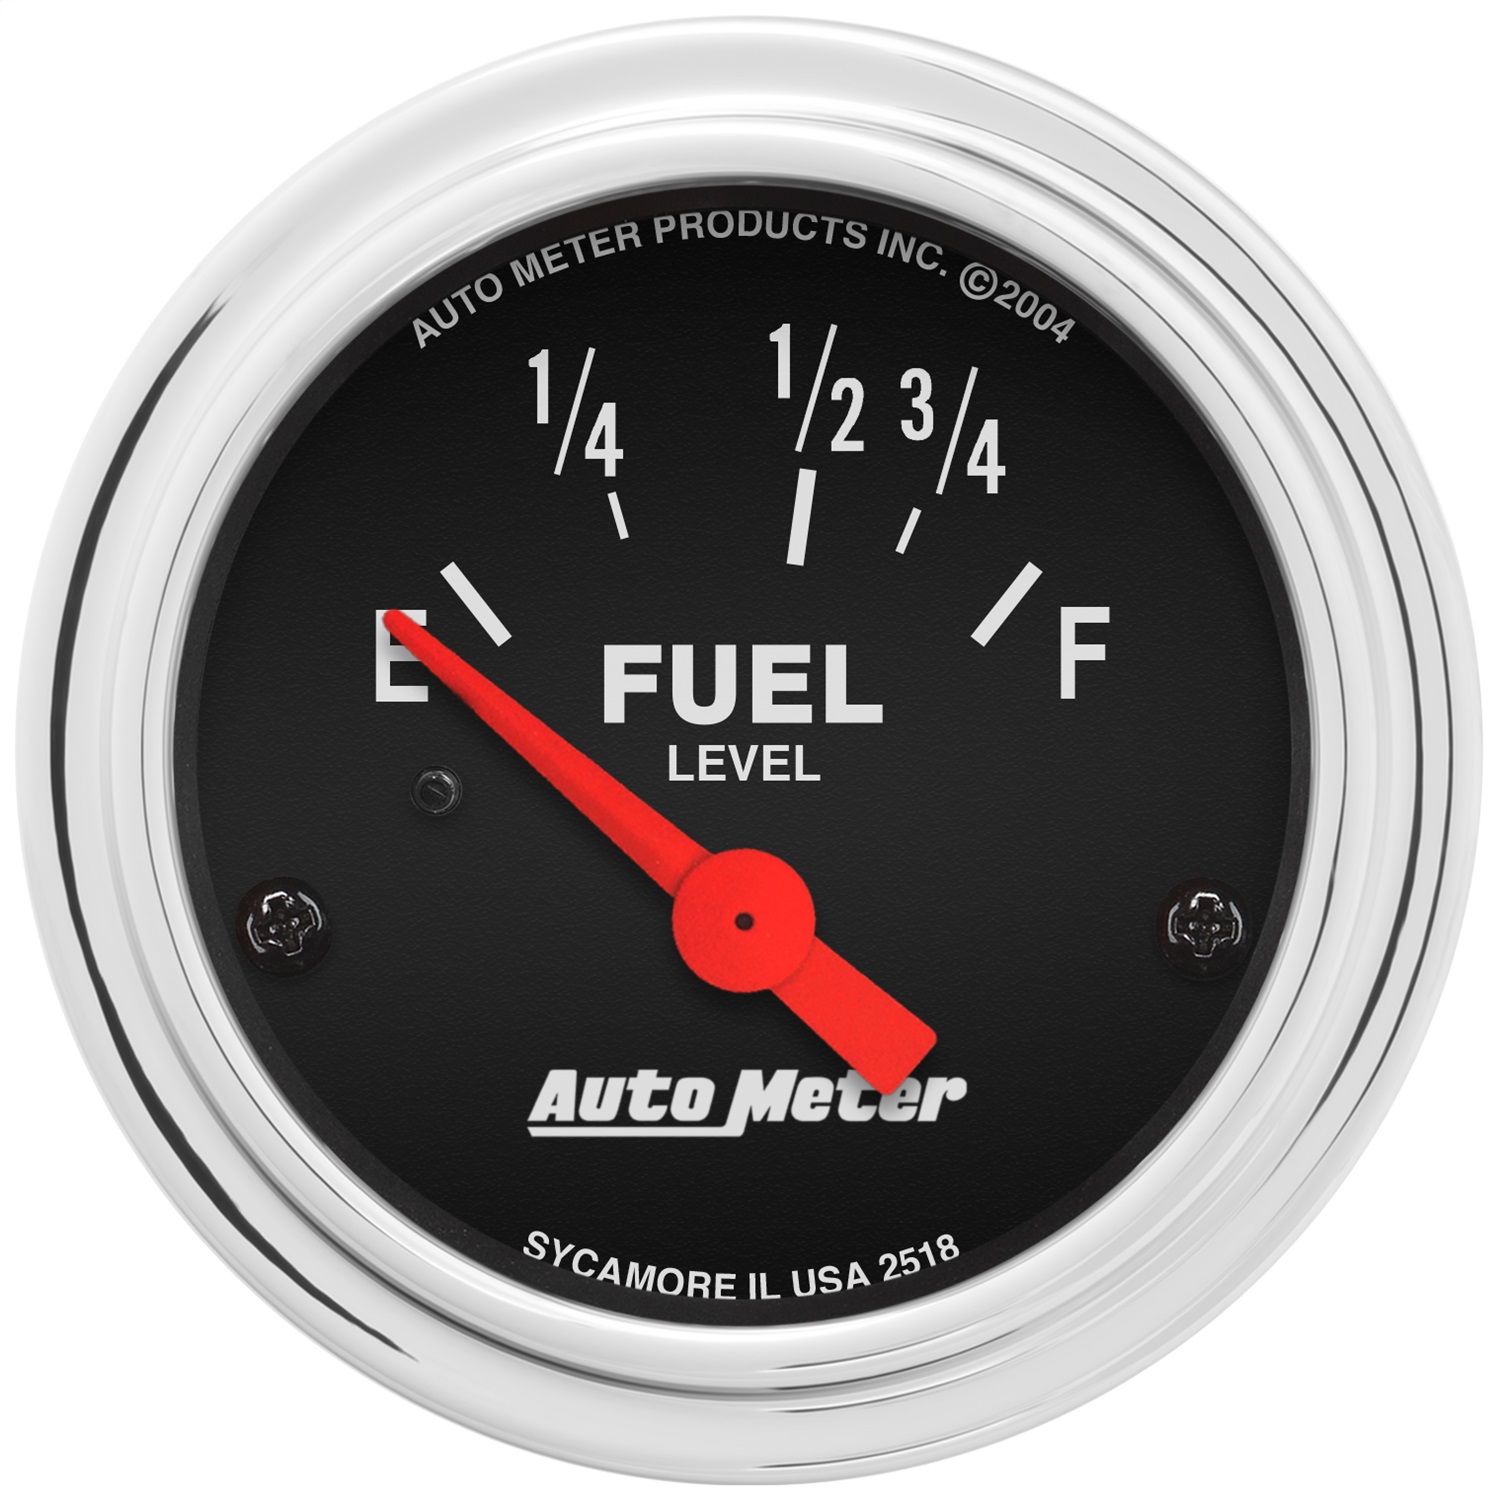 Auto Meter Auto Meter 2518 Traditional Chrome Electric Fuel Level Gauge